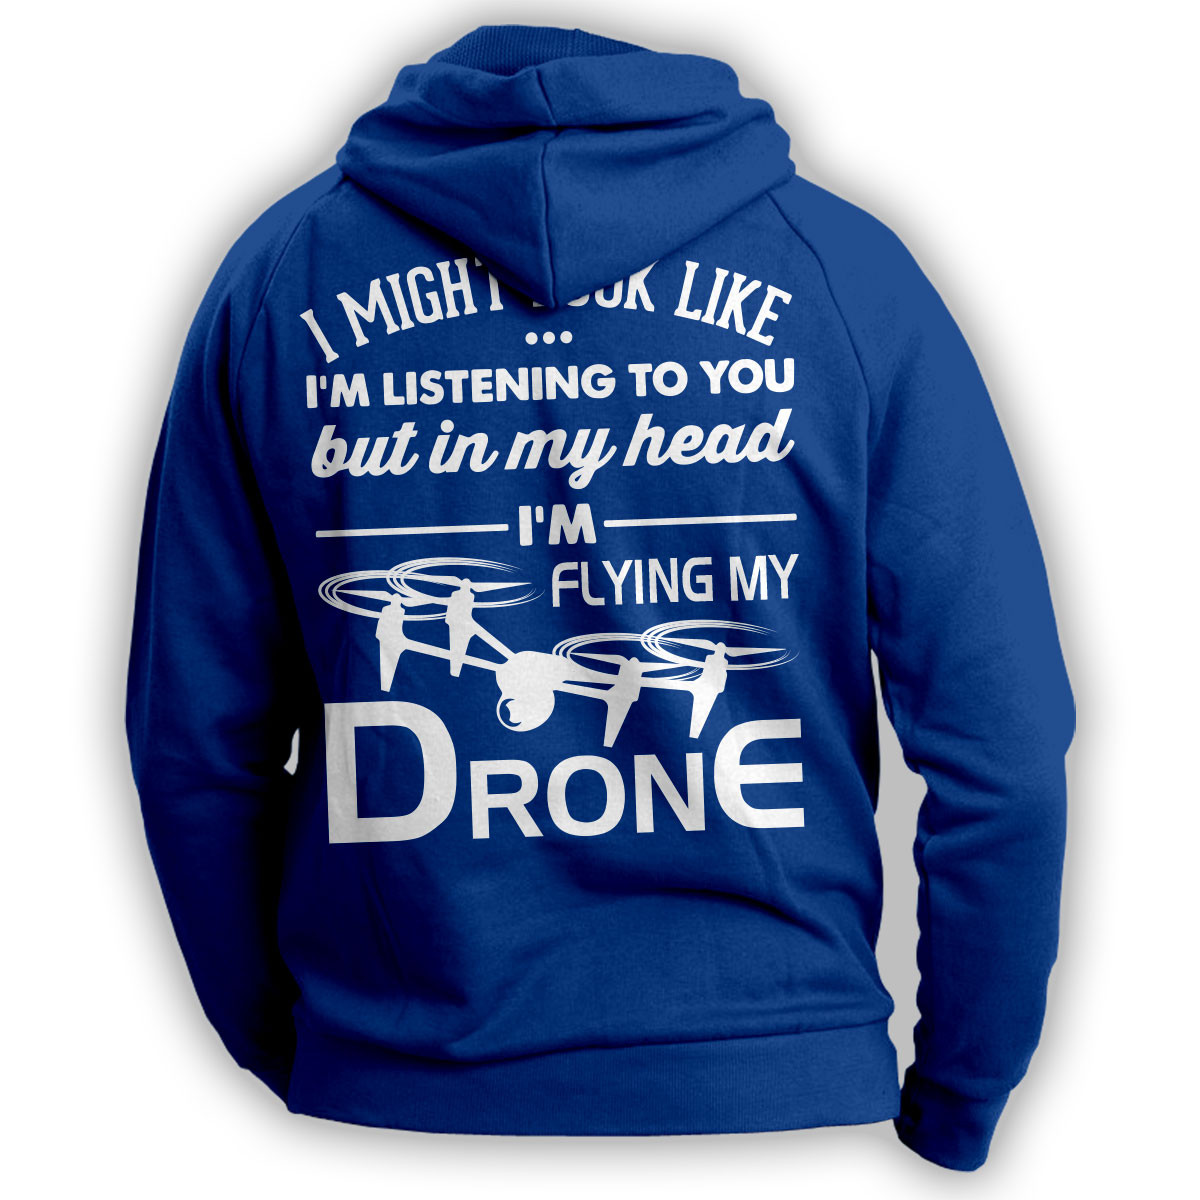 "I Might Look Like I'm Listening To You" Drone Flying Hoodie